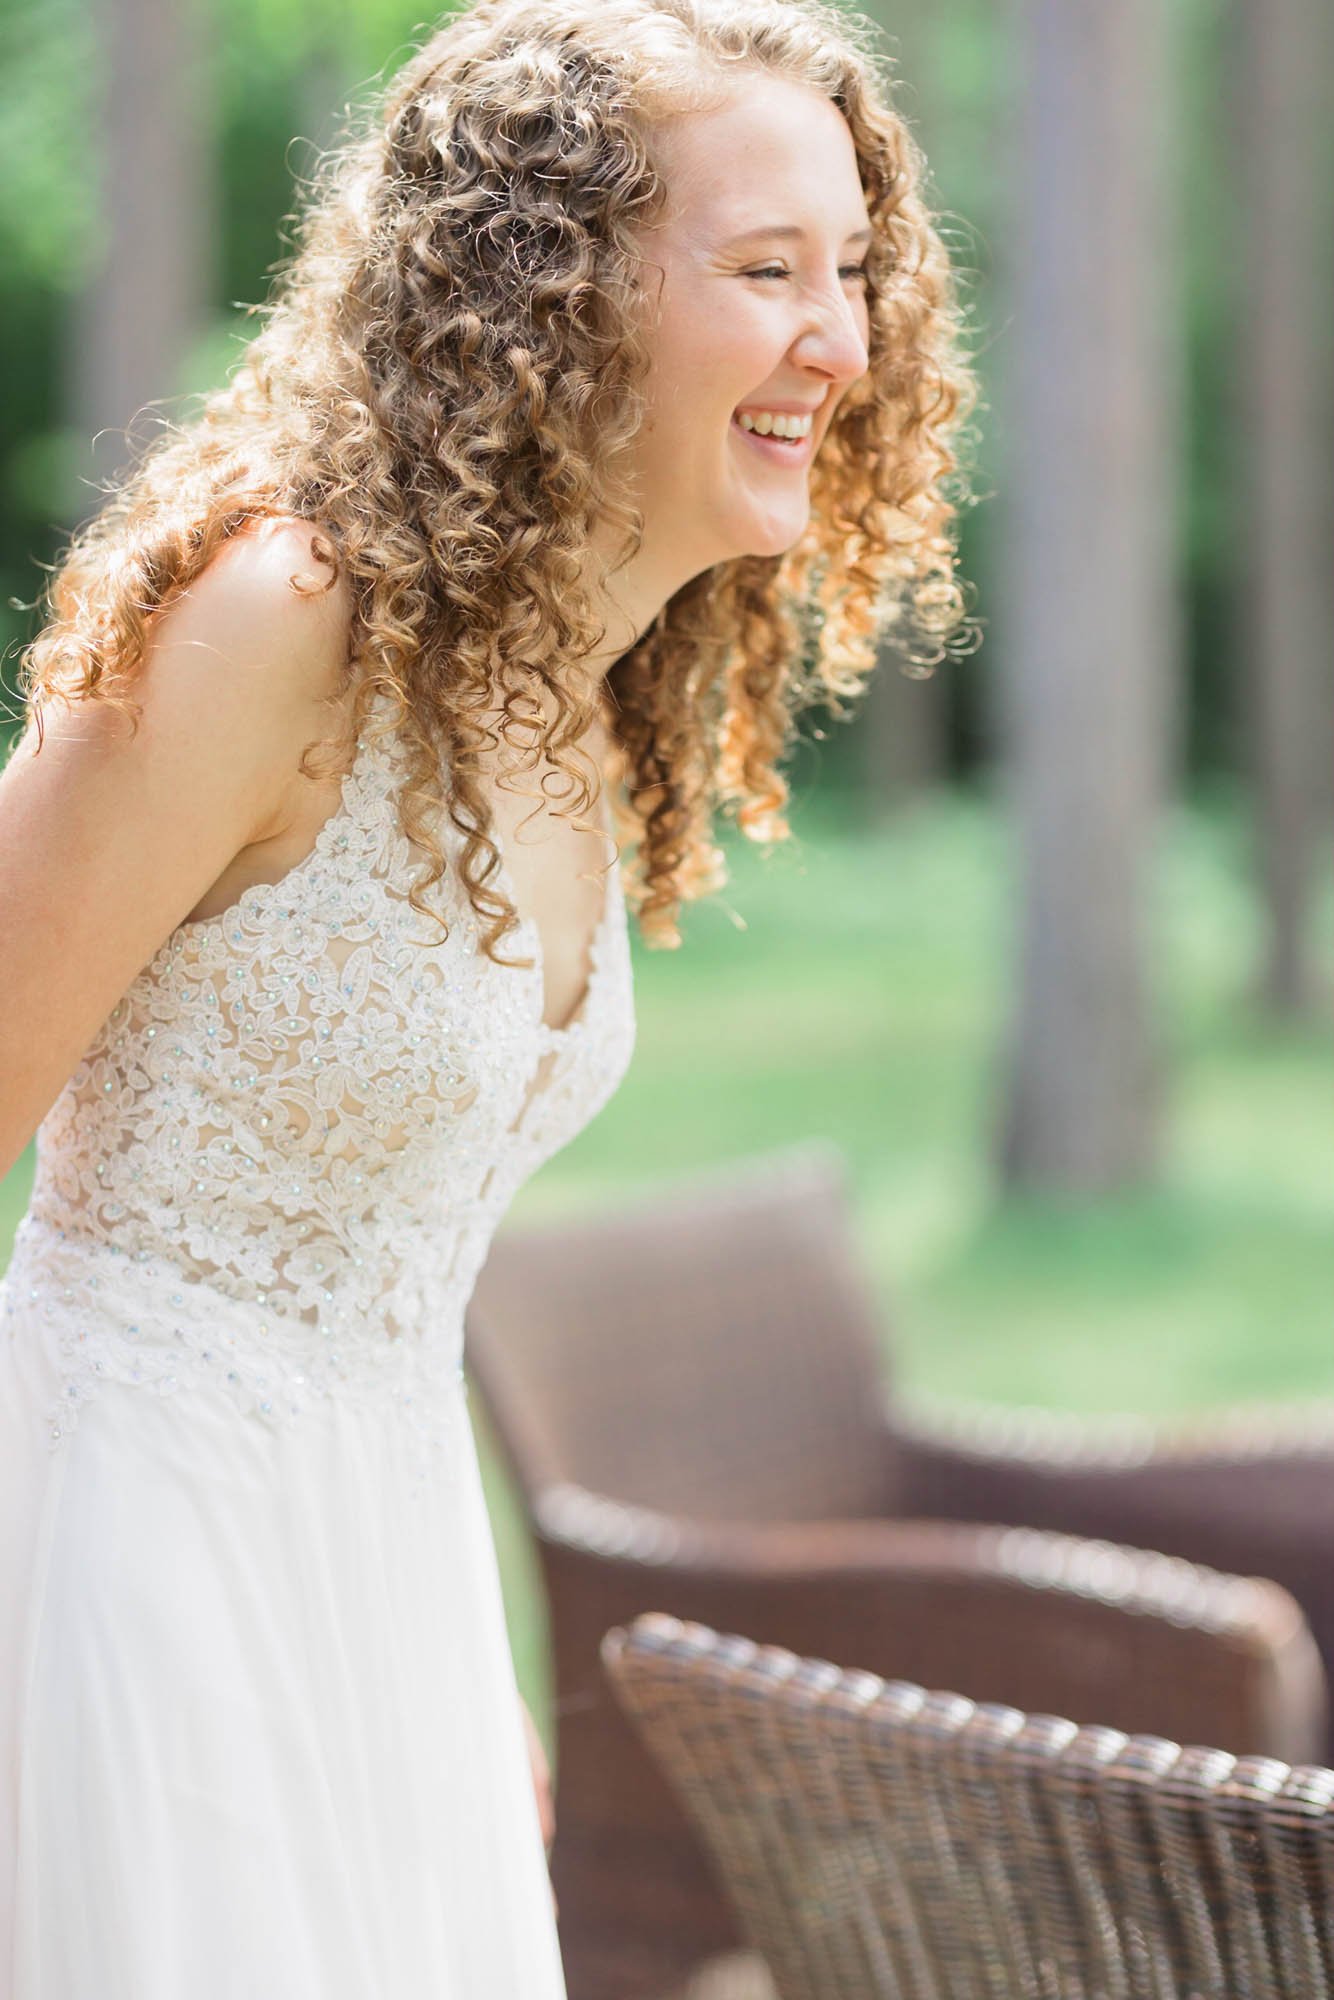 jessica-kovach-photography-lakeside-wisconsin-small-and-intimate-wedding-elopement-with-friends-and-family-65.jpg